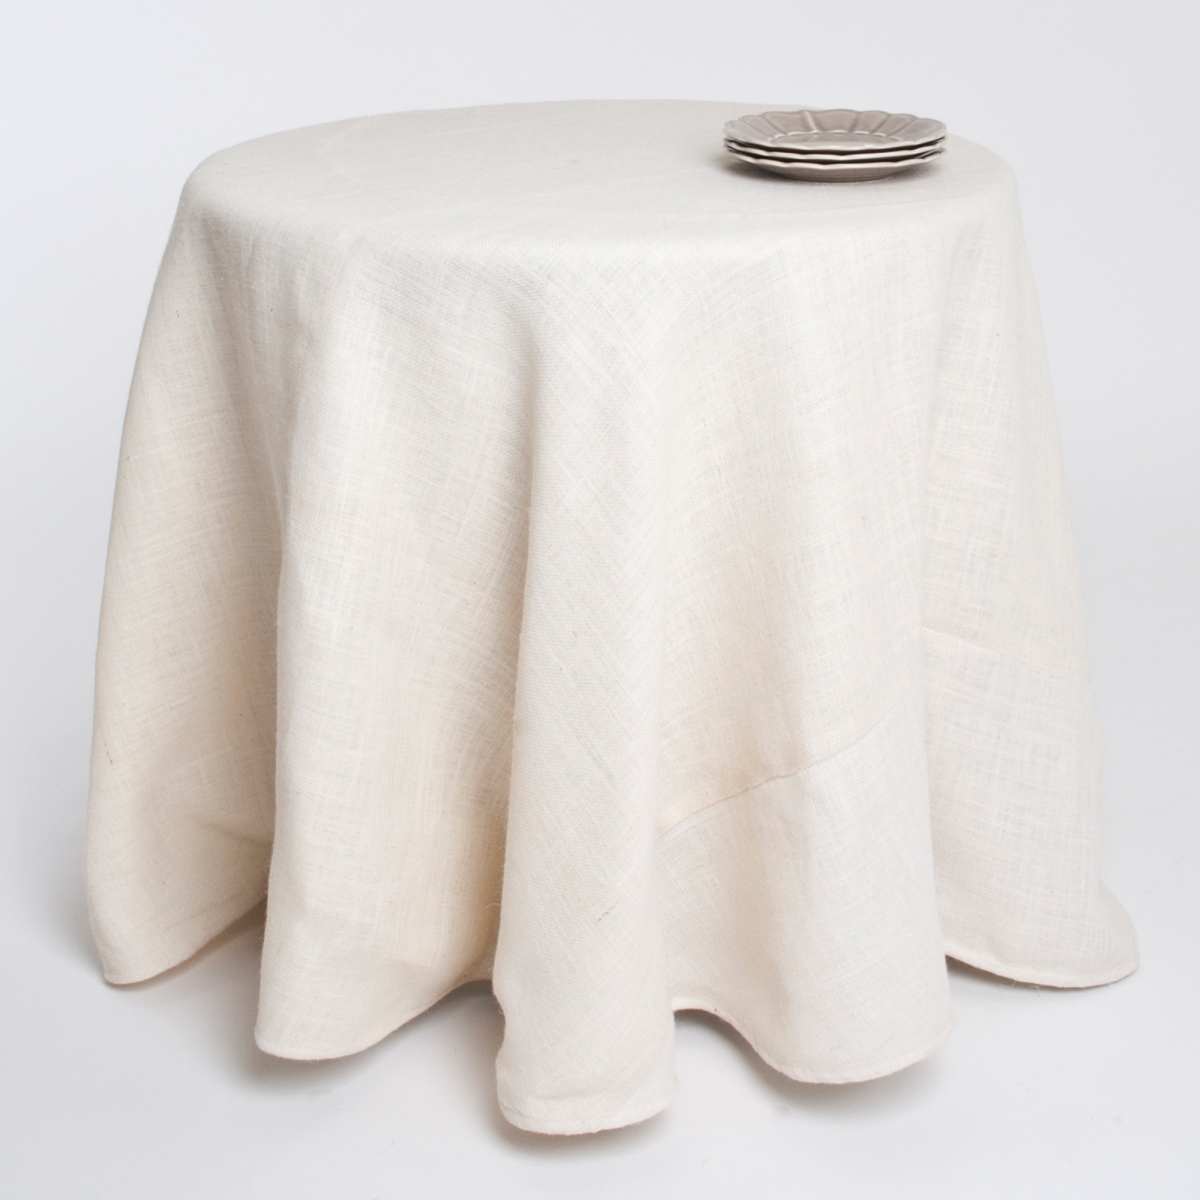 Cookhouse SARO  120 in. Round Burlap Tablecloth - Ivory